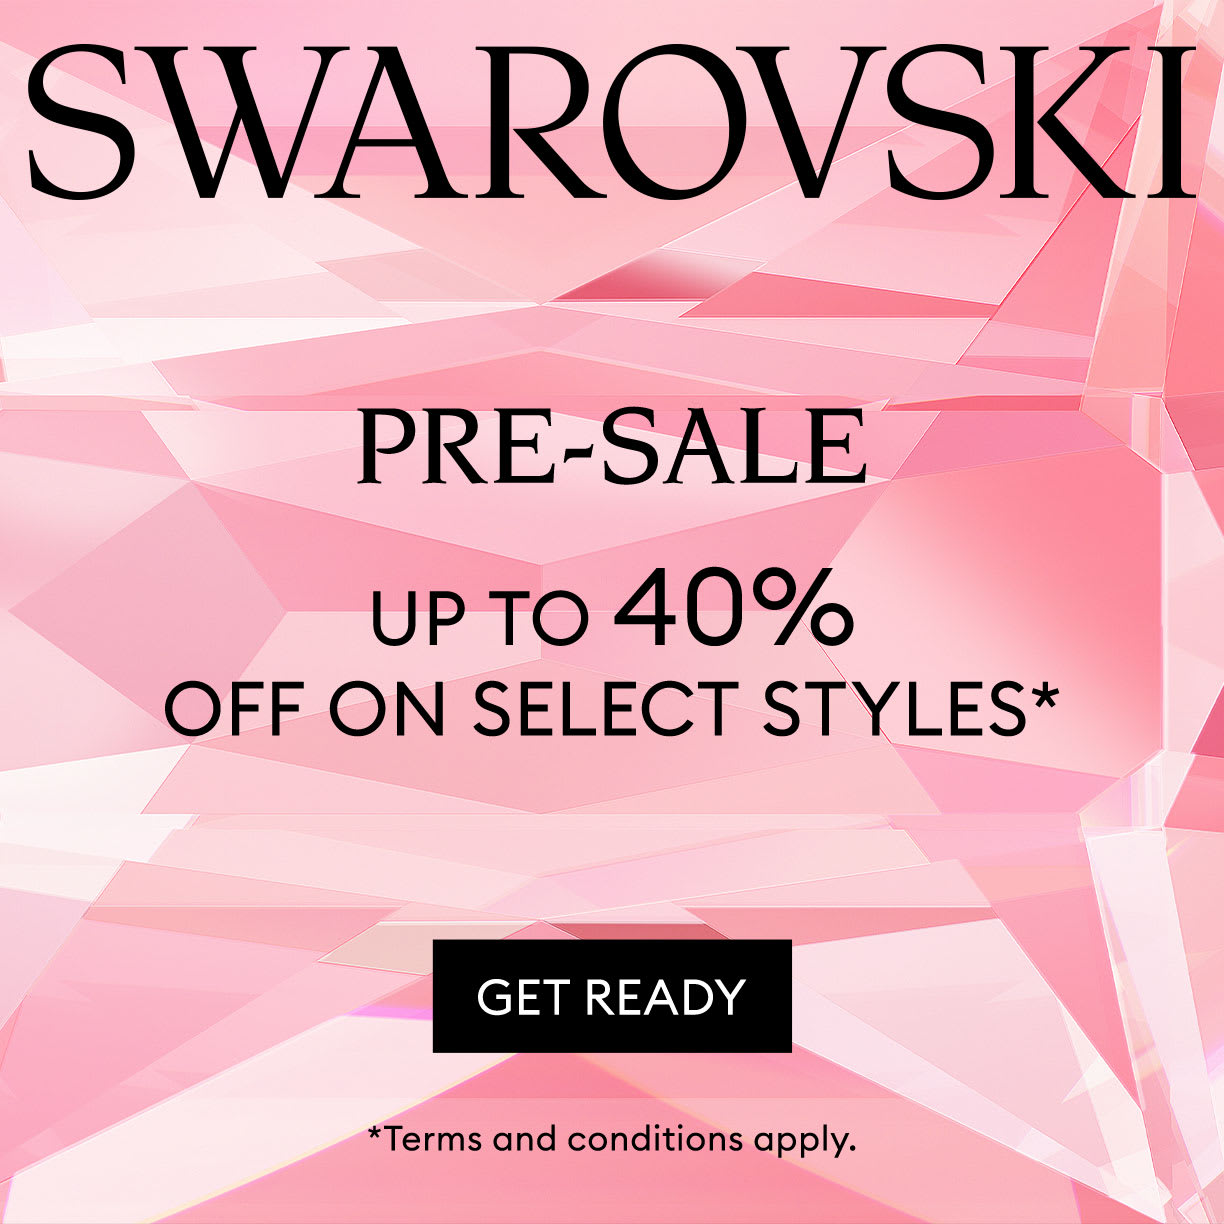 Pre-sale up to 40% off on select styles*